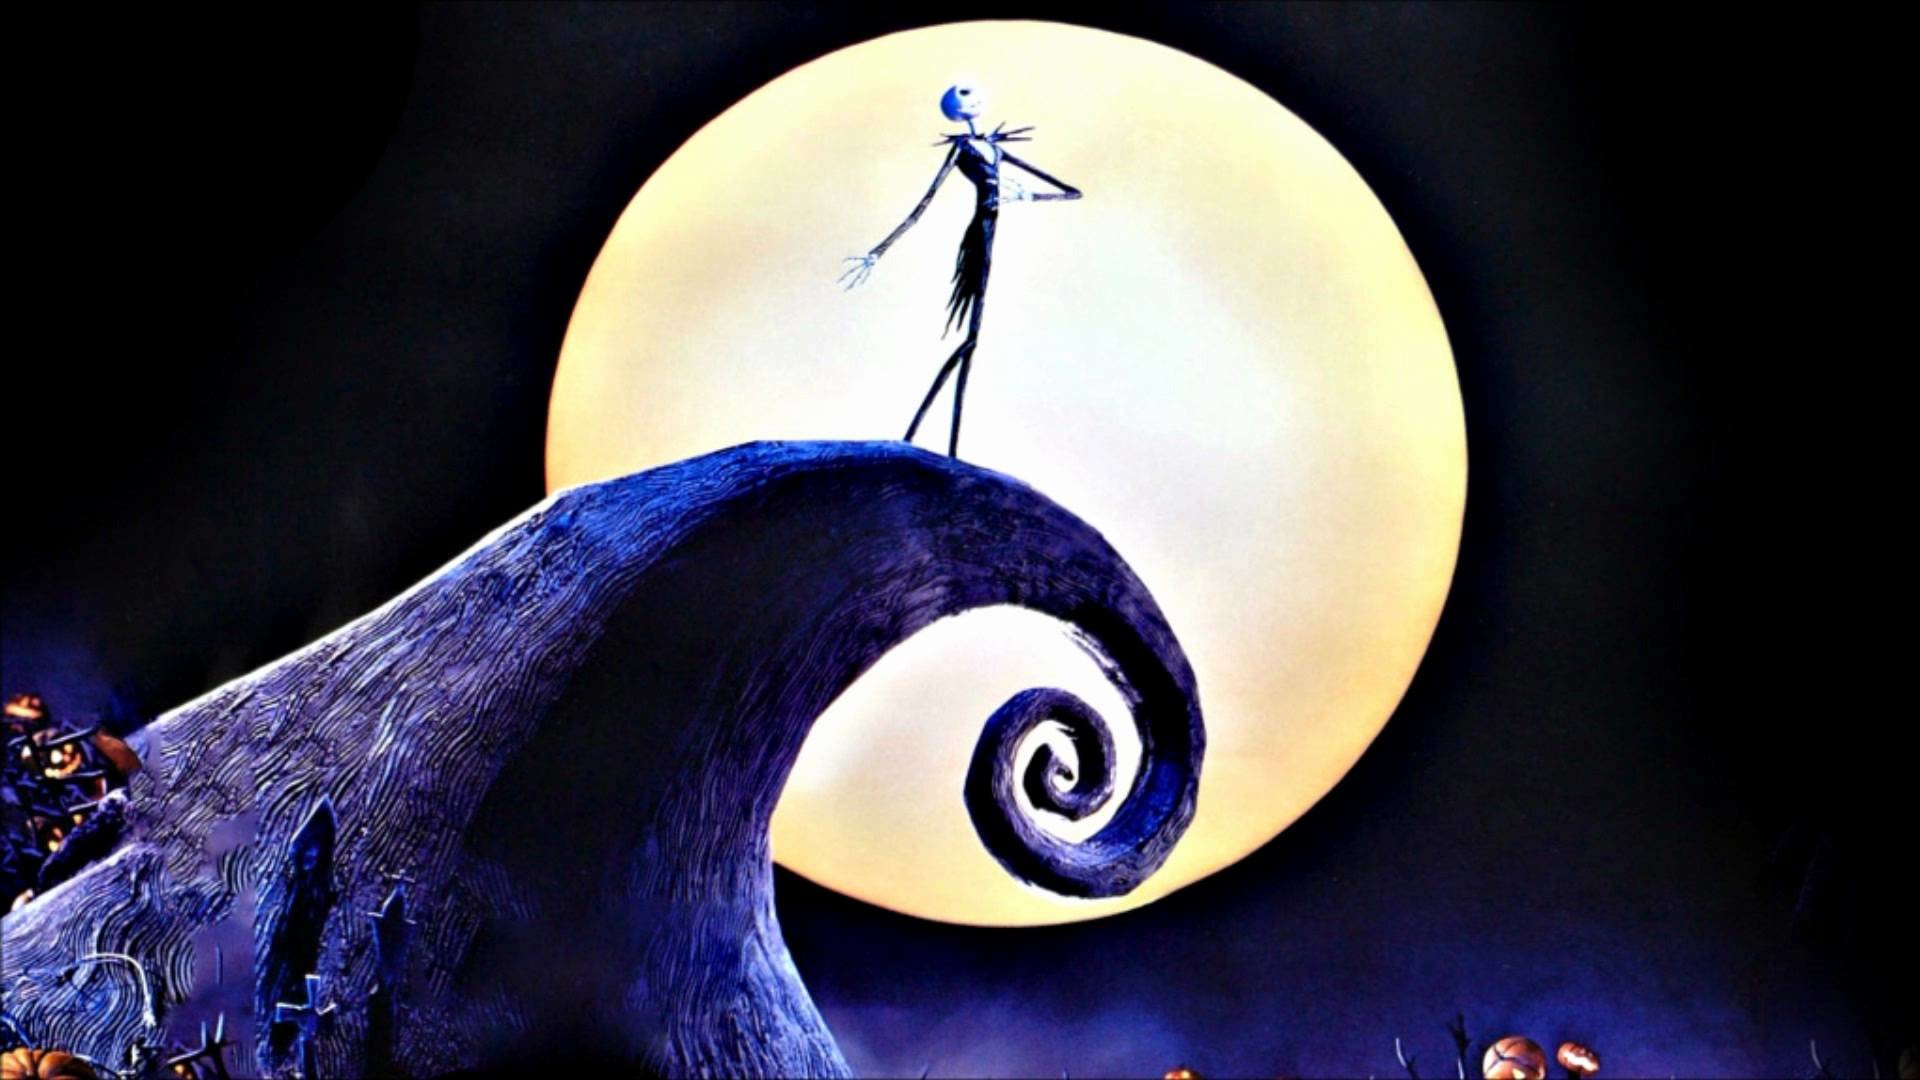 1920x1080 The nightmare before christmas wallpaper 7